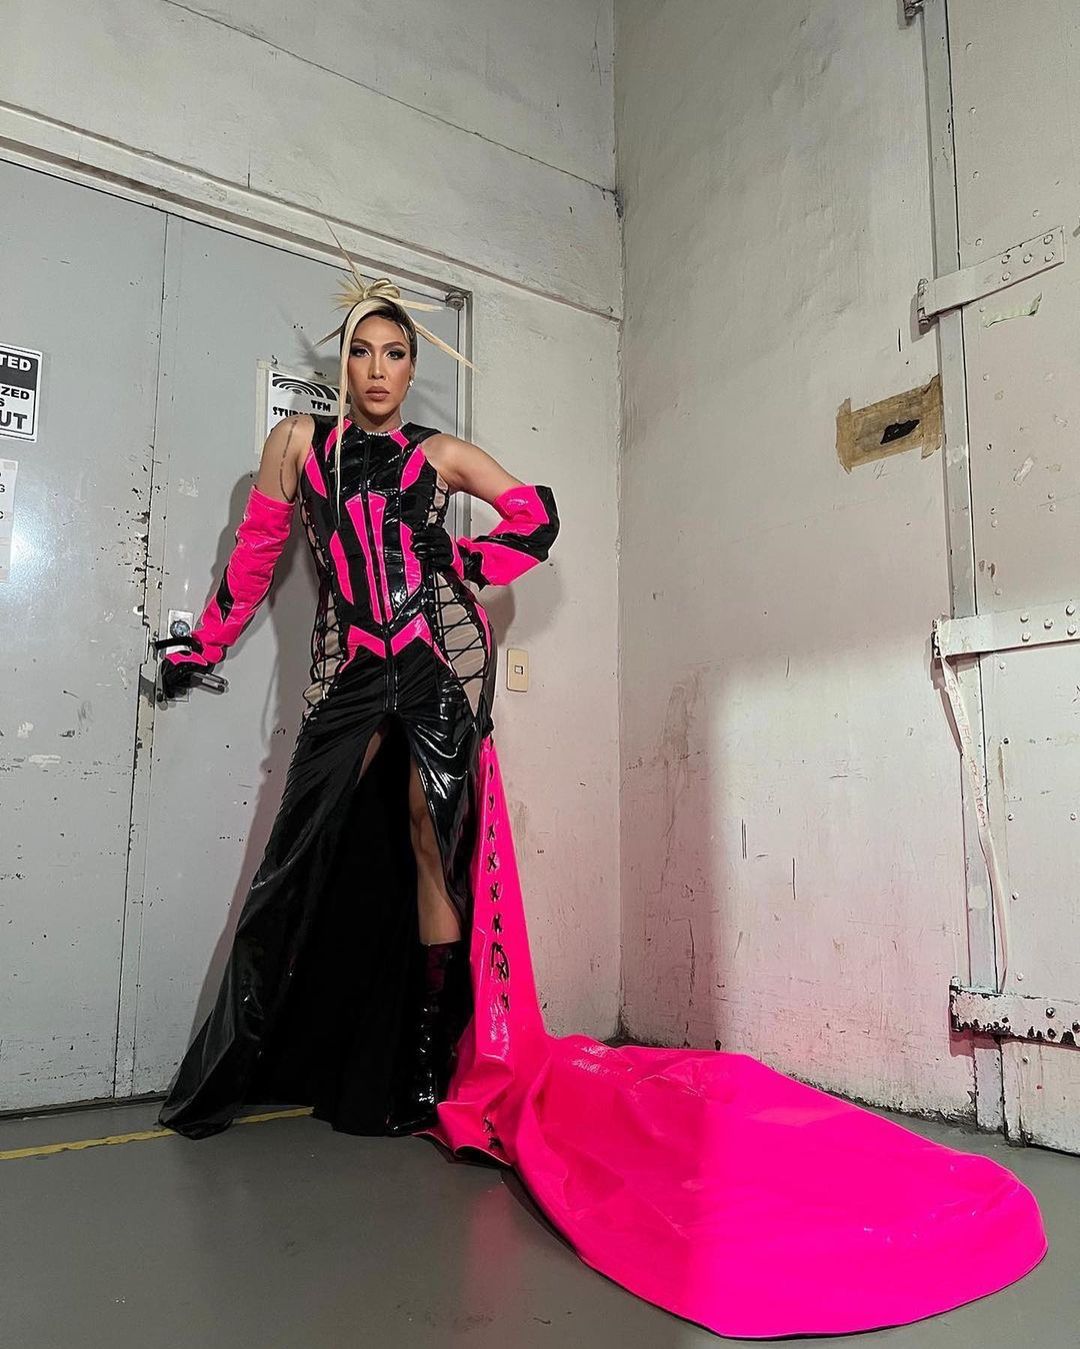 Daily Tribune - LOOK: Vice Ganda is a vision as a bride, modeling